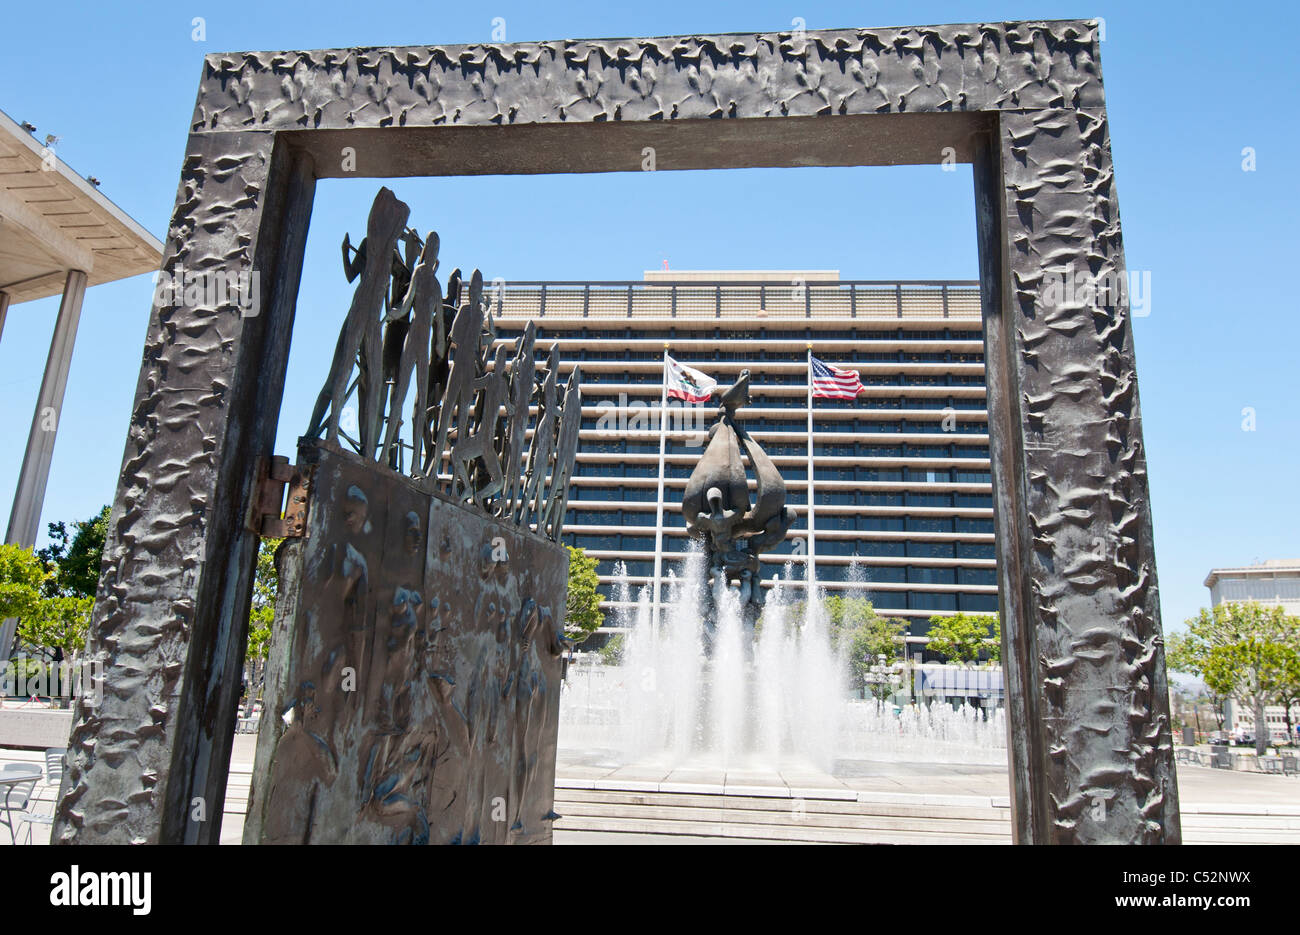 The famous fountain at the Los Angeles Music Center in Downtown Los Angeles. Stock Photo